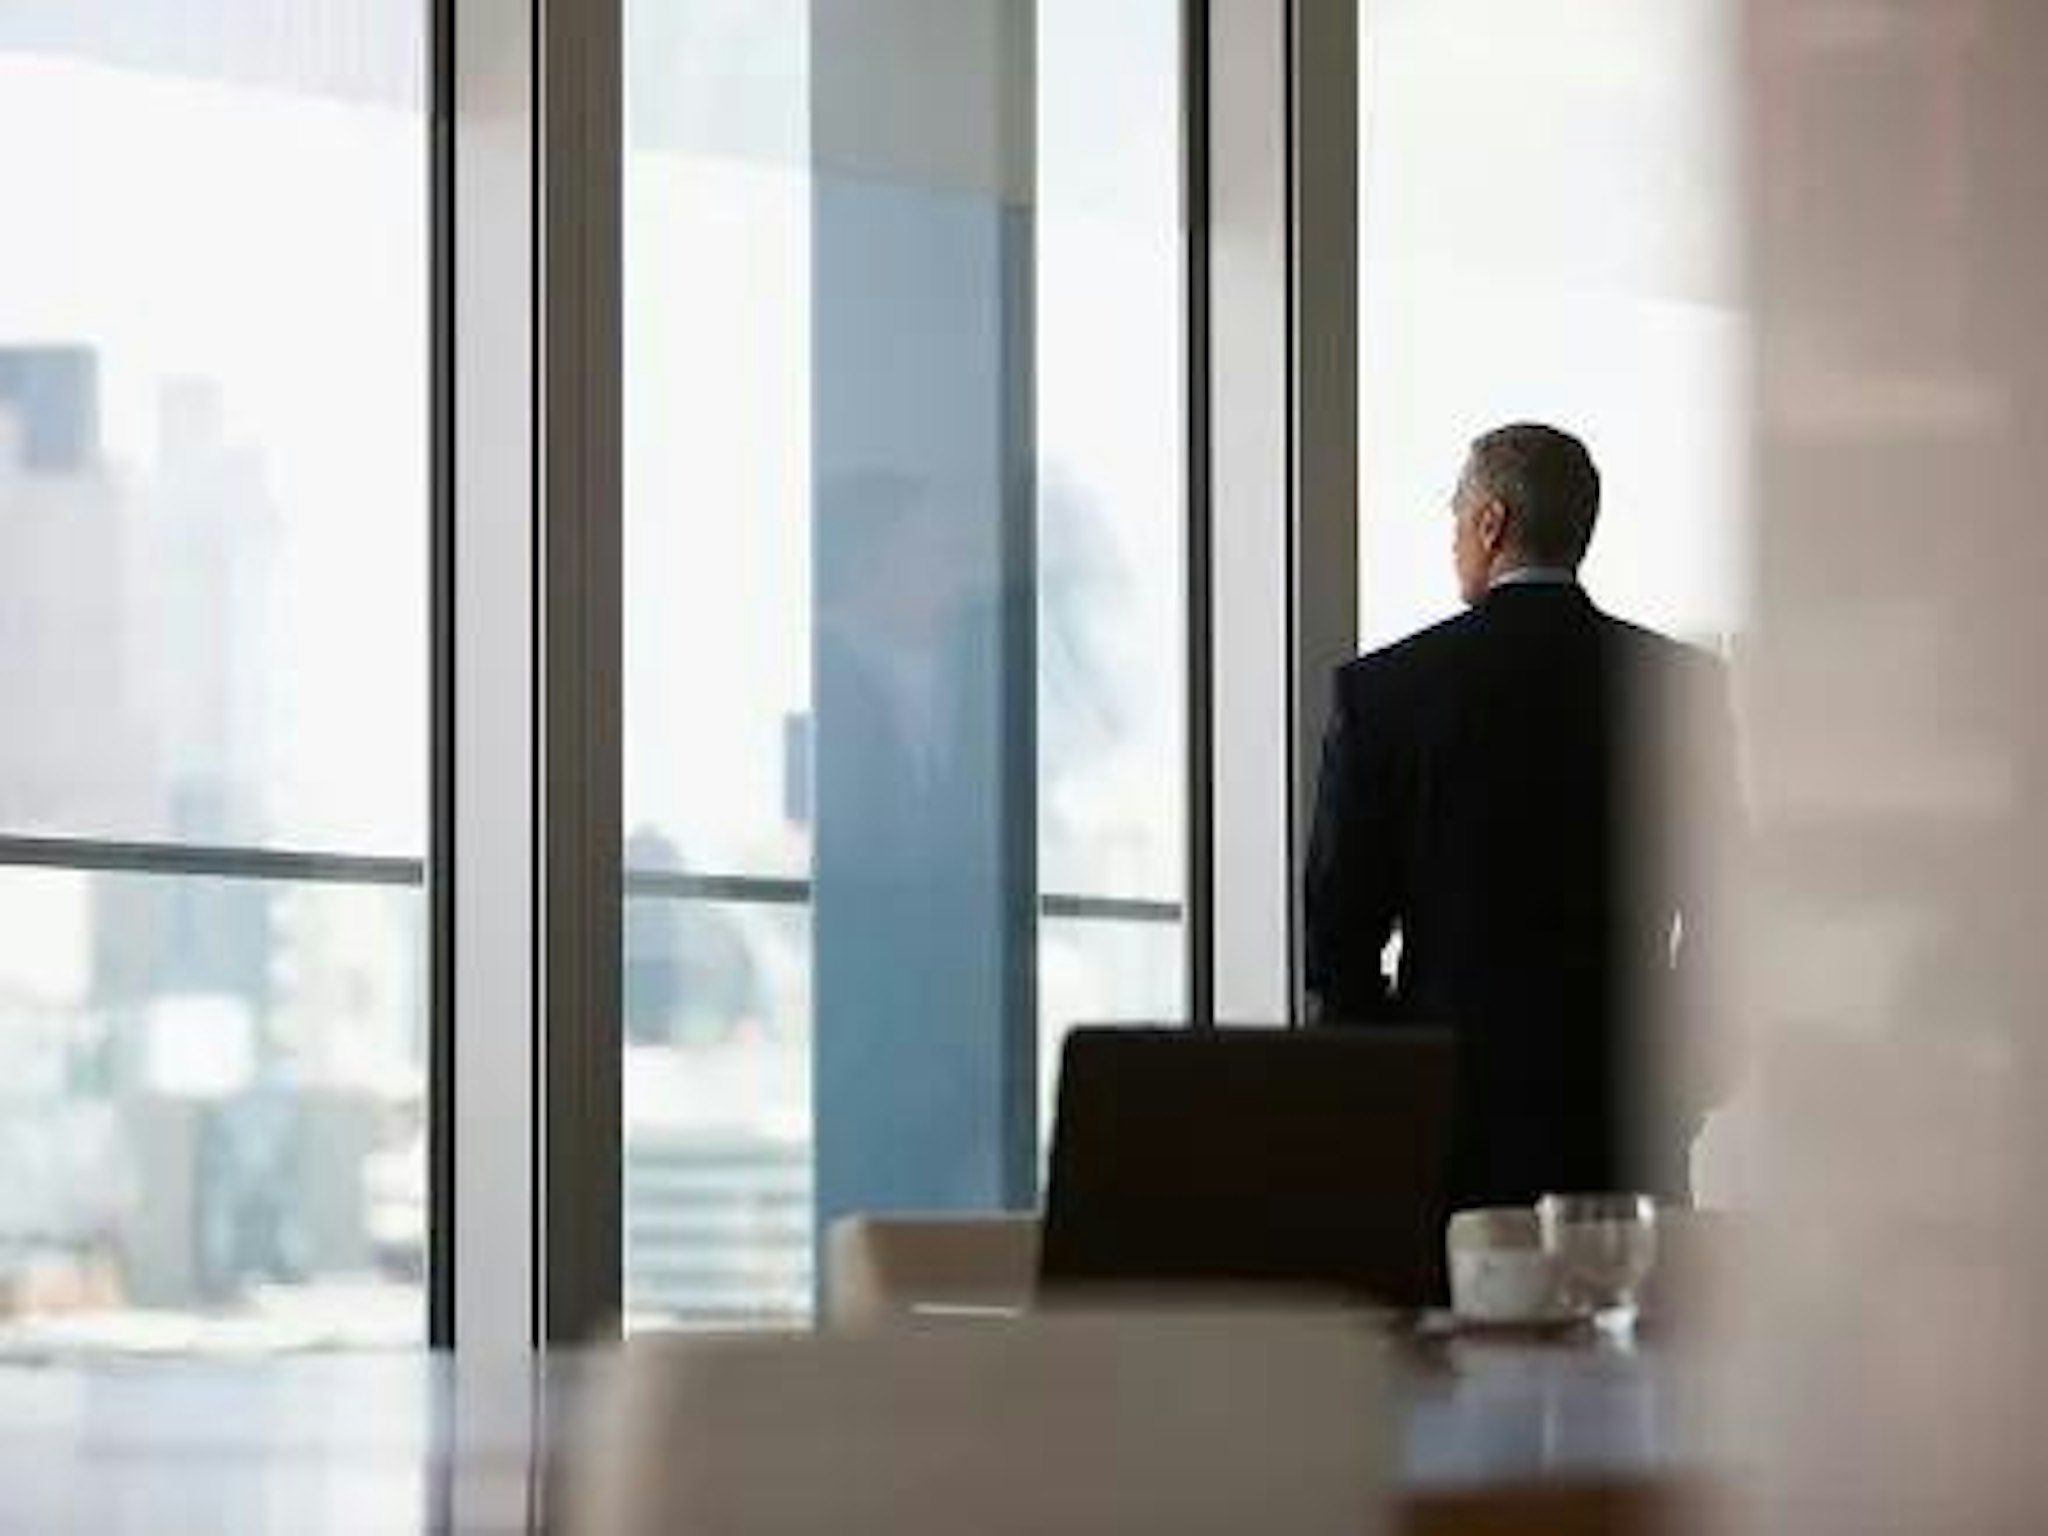 Board member considers business ethics and corporate social responsibility while looking outside boardroom window